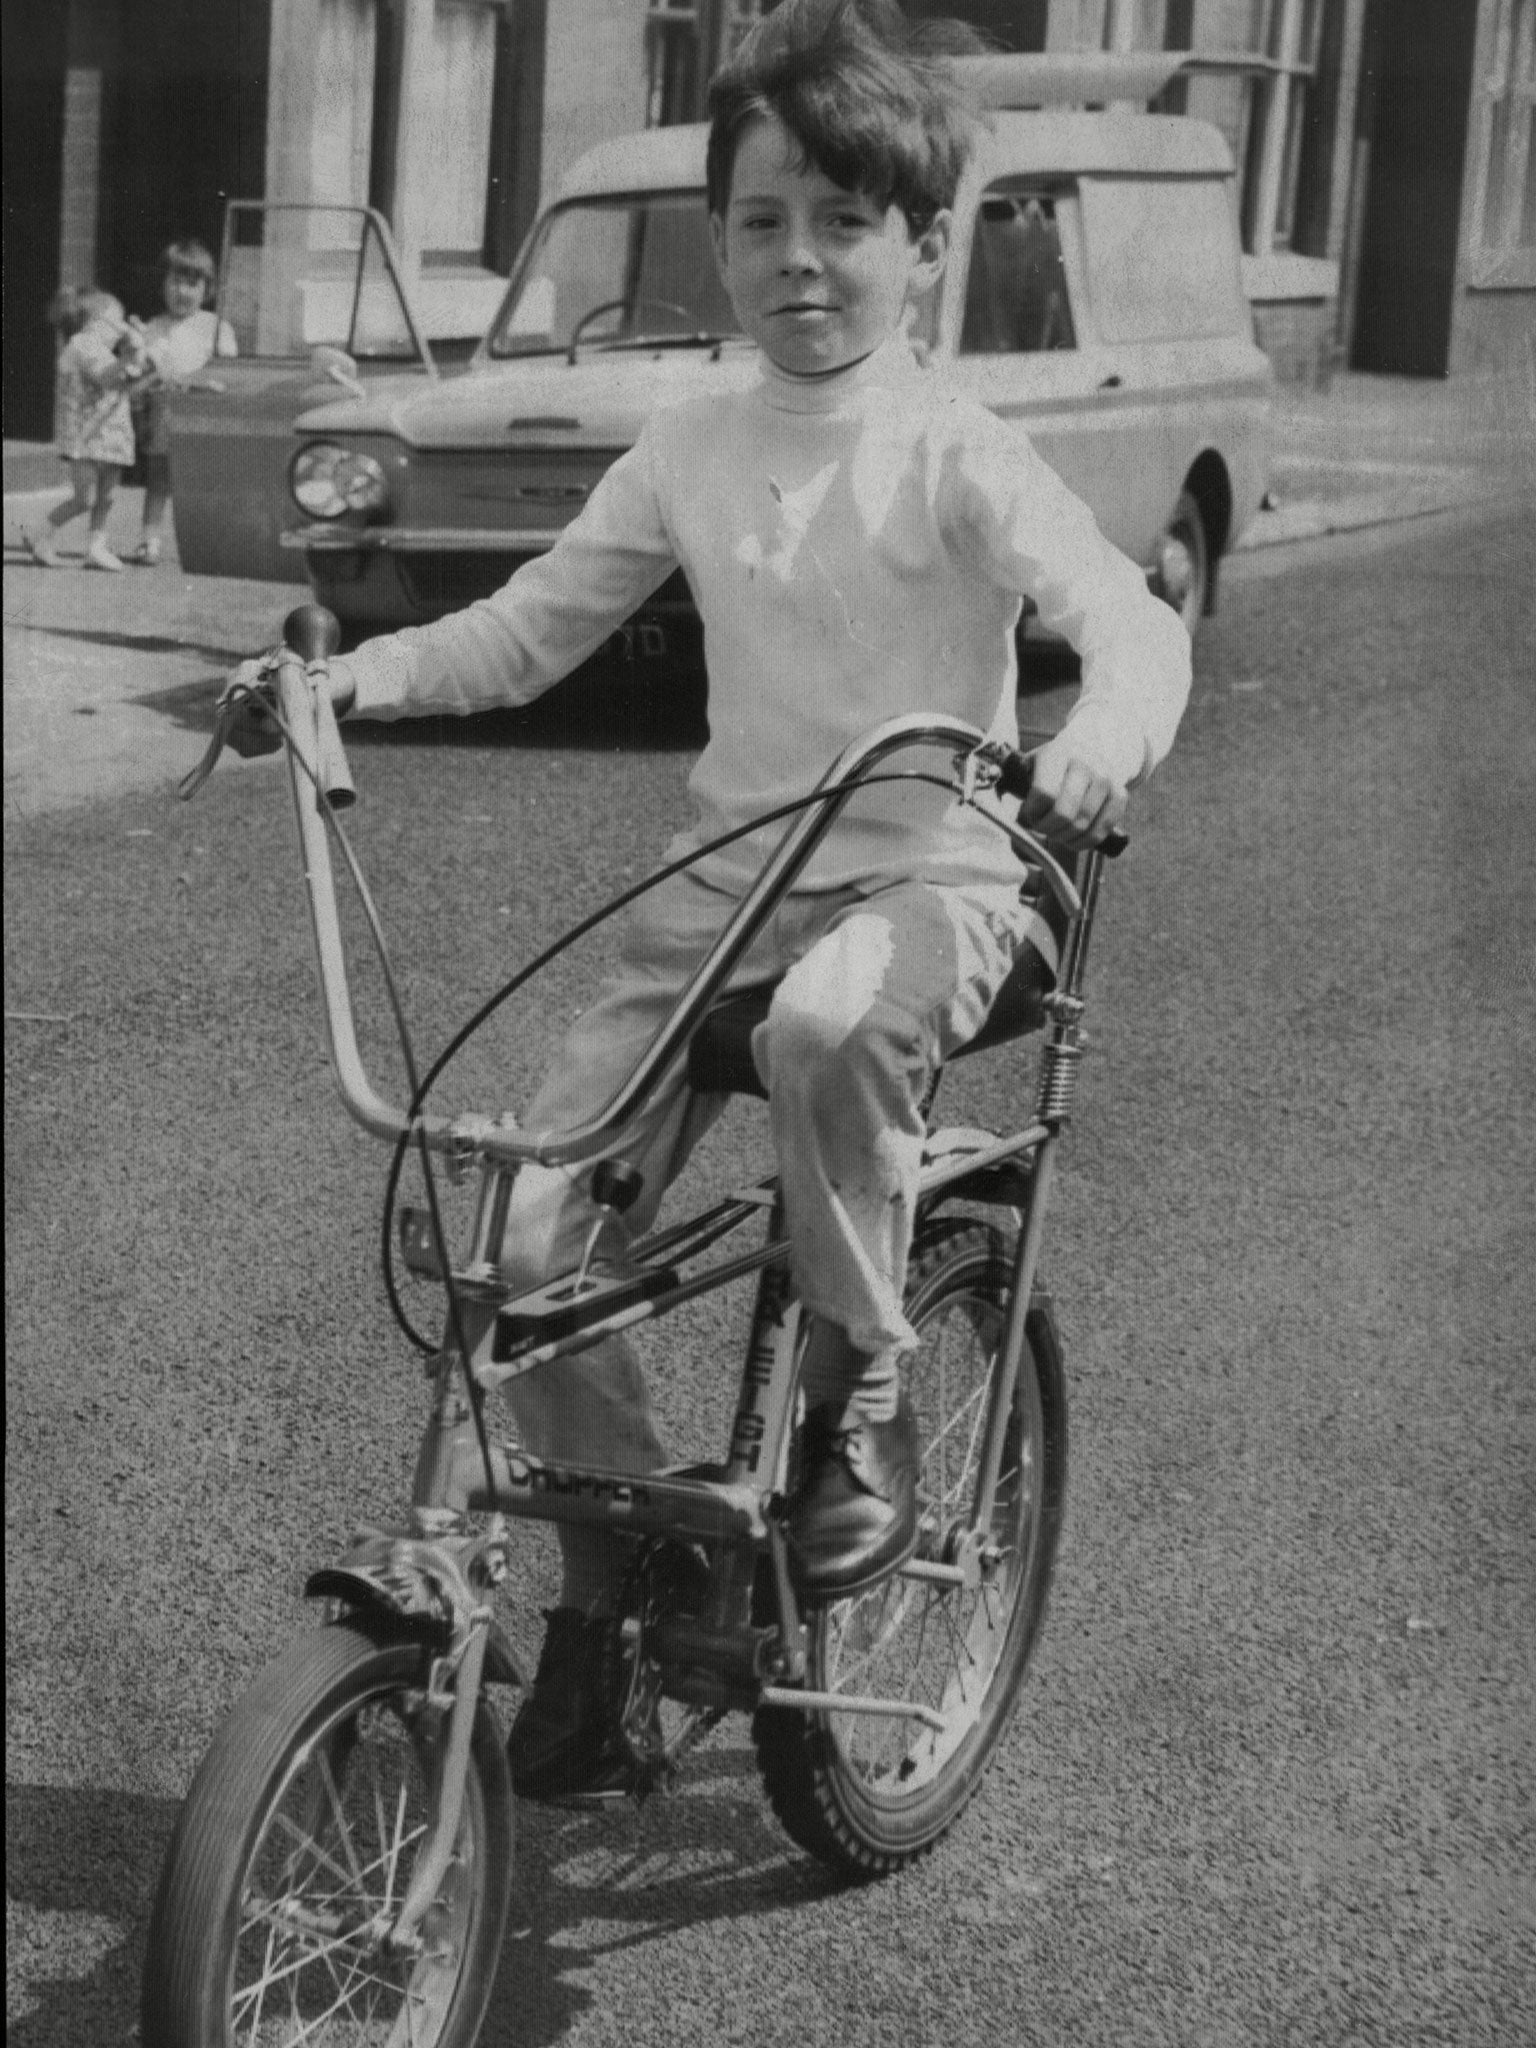 In 1970, schoolboy Peter Campbell was given a Chopper as a reward for handing money he had found in the street